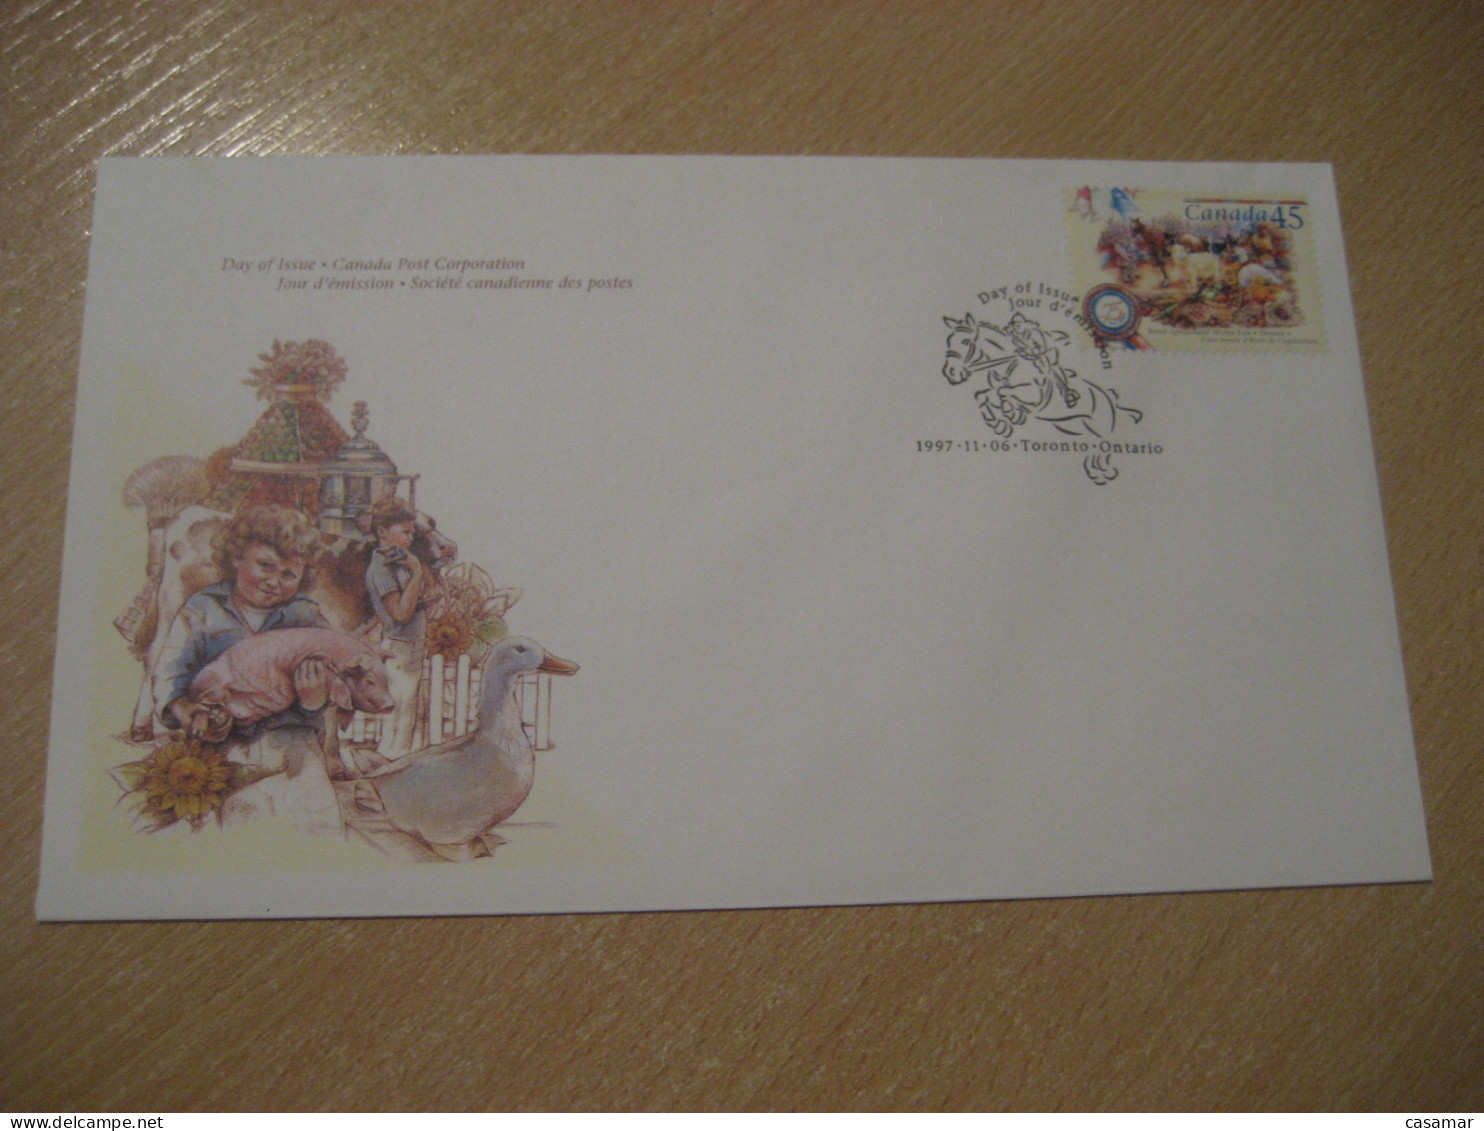 TORONTO 1997 Yvert 1543 Agriculture Fair Equestrian Horse Competition FDC Cancel Cover CANADA - 1991-2000